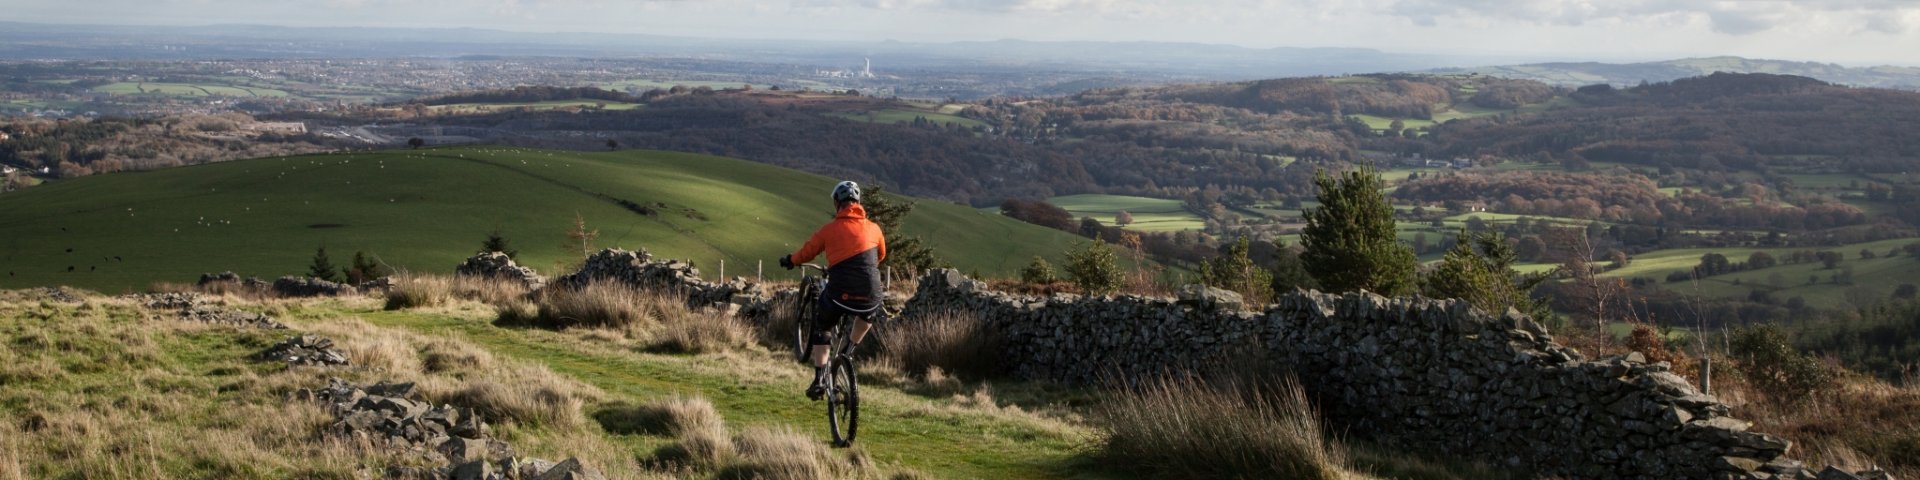 Trail riding in the Clwyd is a great way to use your mountain bike holiday.